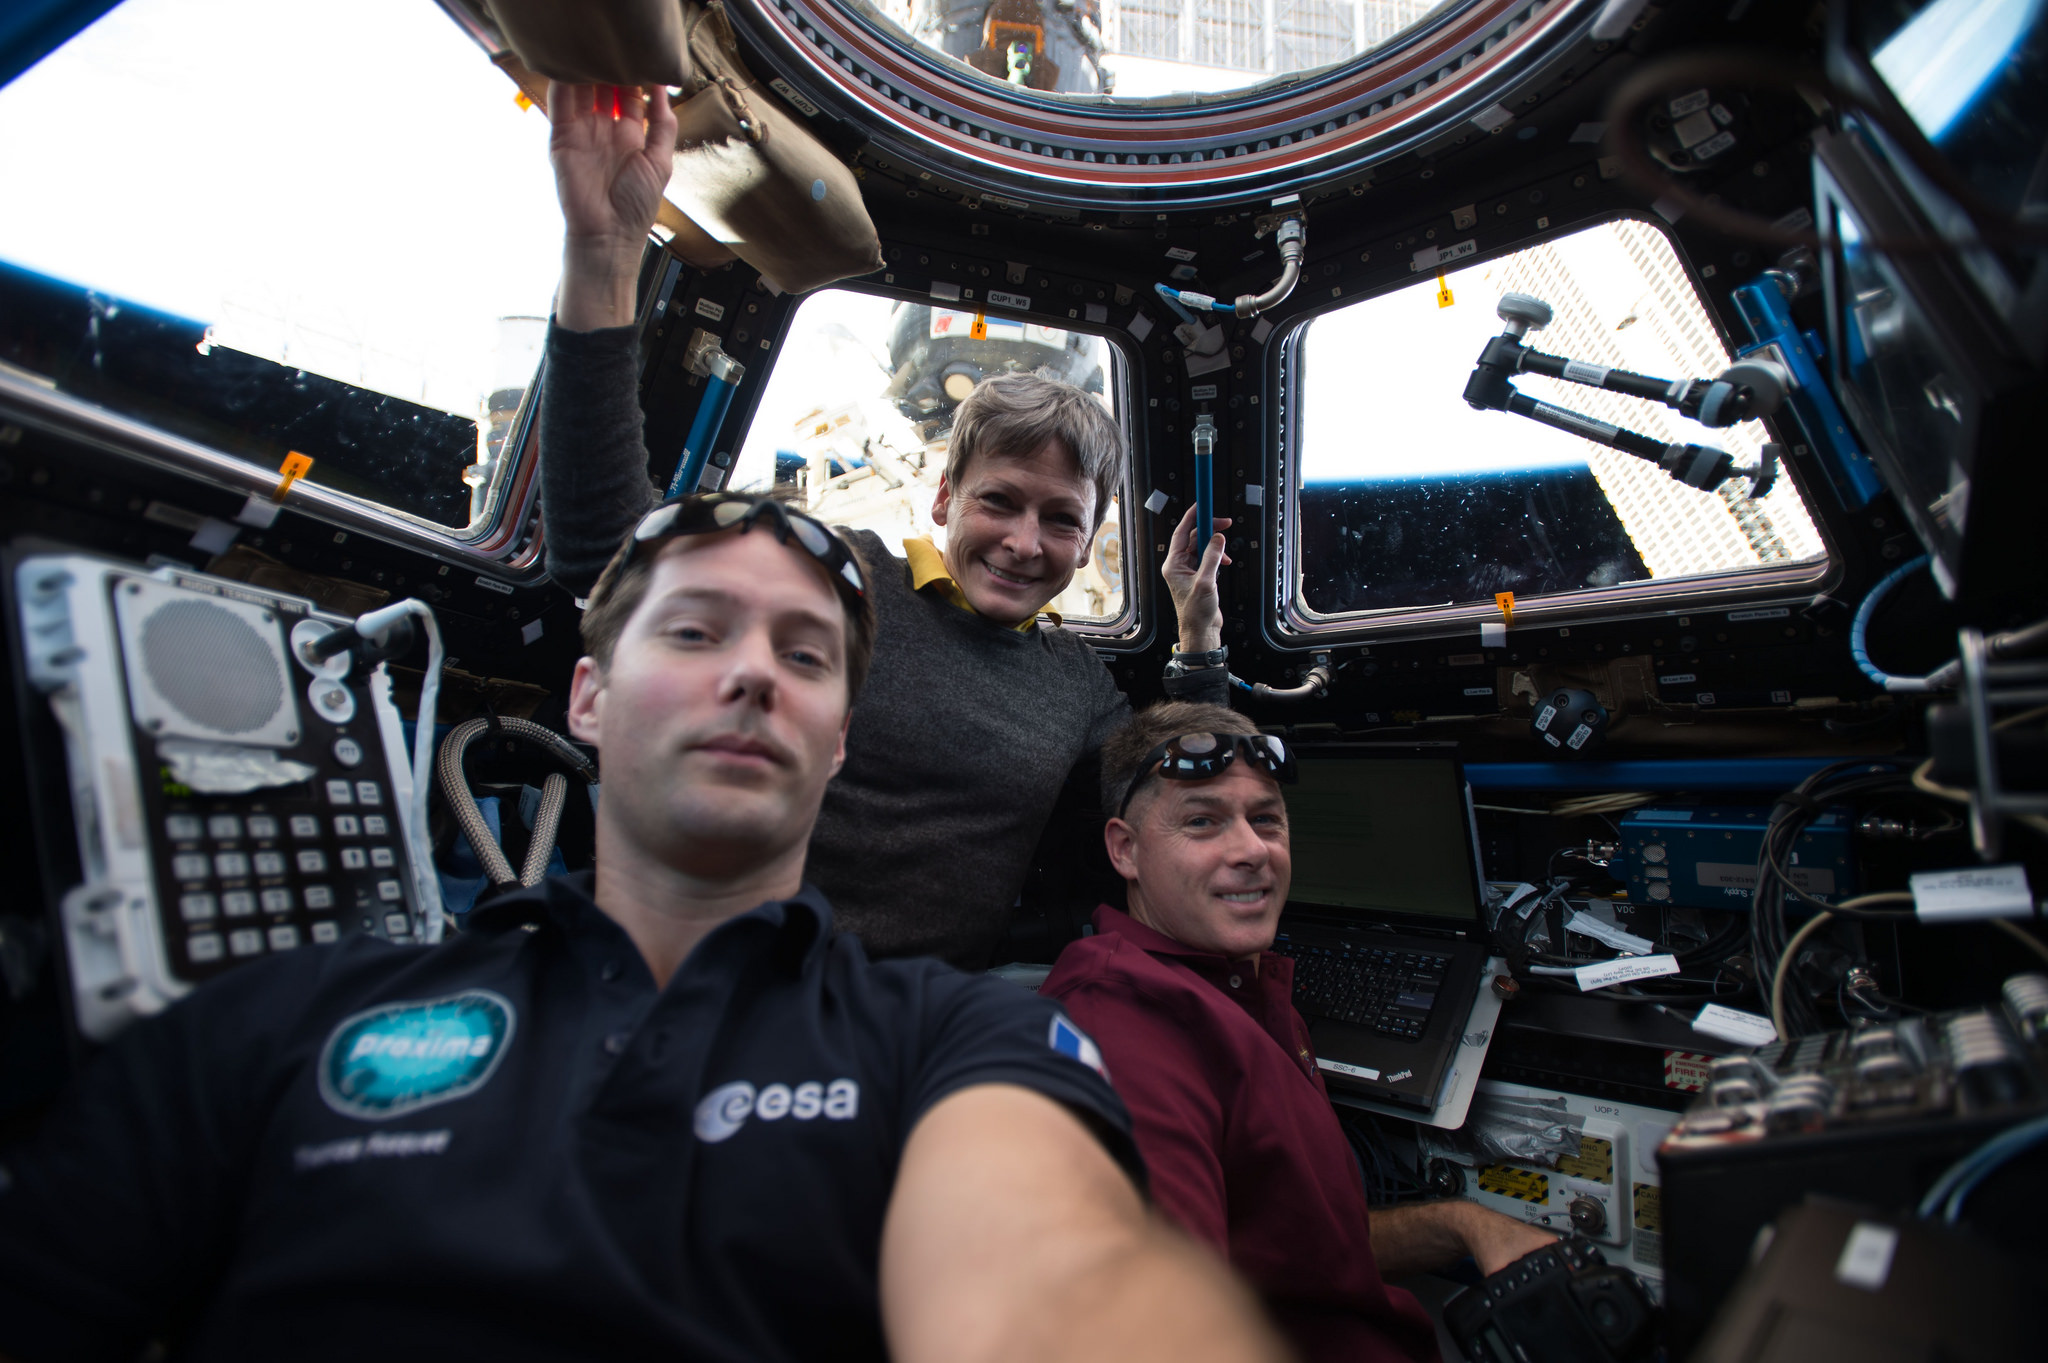 Expedition 50 crew members Thomas Pesquet of ESA (European Space Agency) and Peggy Whitson and Shane Kimbrough of NASA